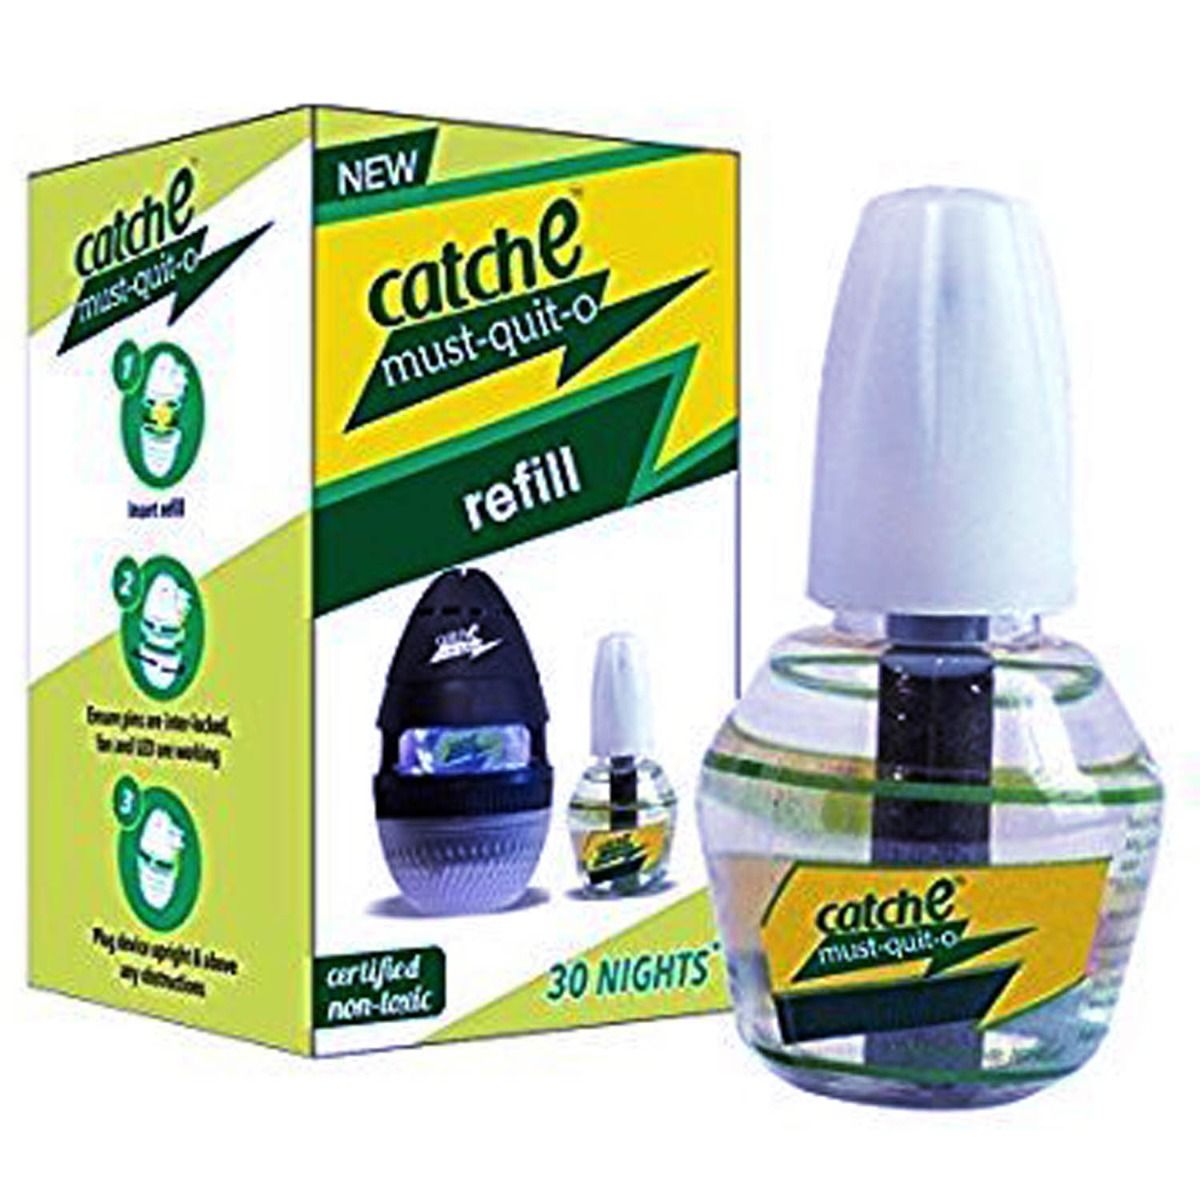 Catche Must-Quit-O 30 Nights Refill, 35 ml, Pack of 1 